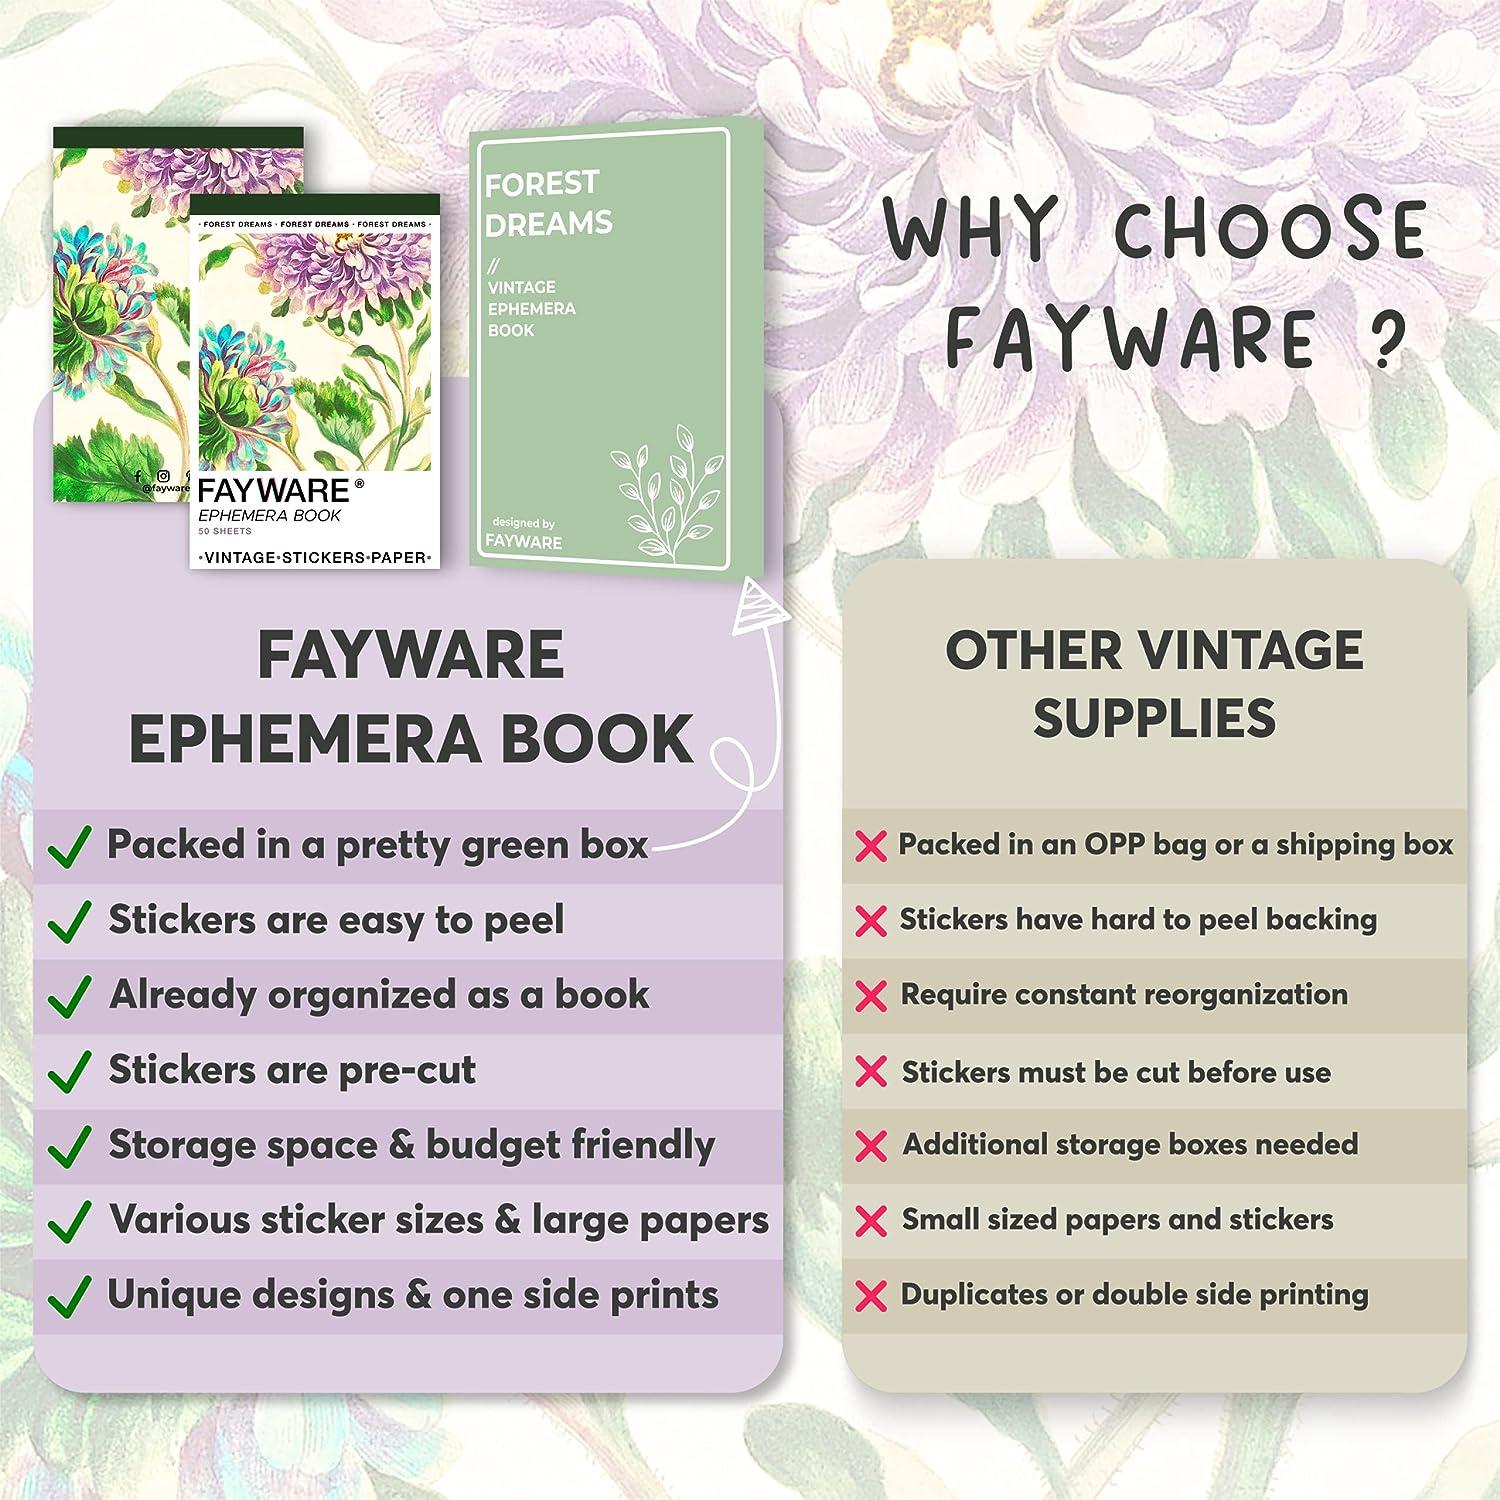 Our Products - FAYWARE